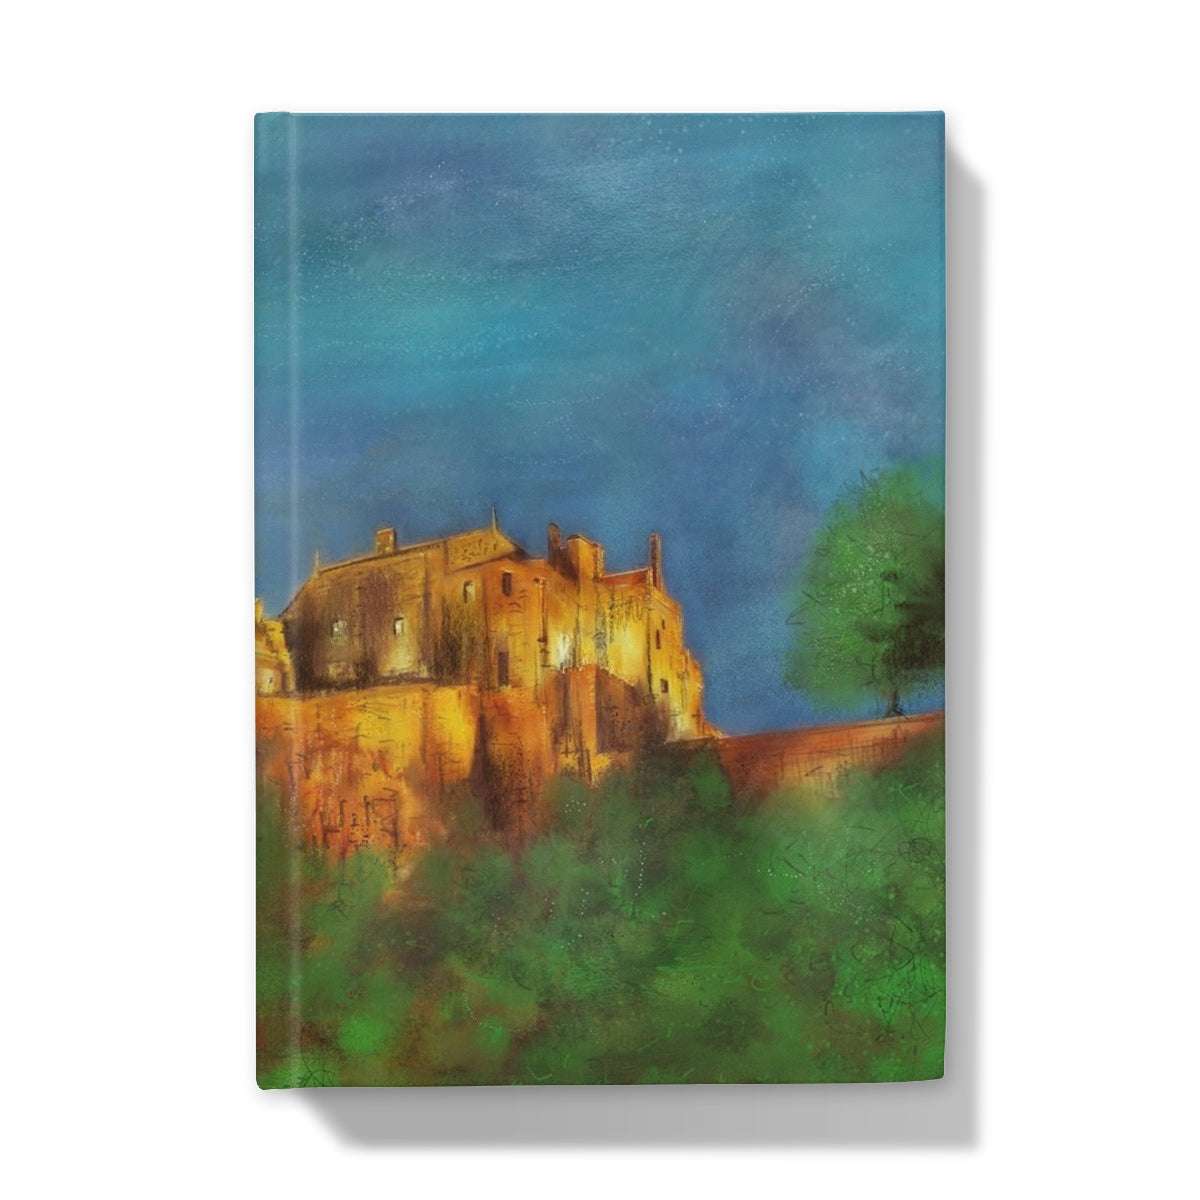 Stirling Castle Art Gifts Hardback Journal-Journals & Notebooks-Historic & Iconic Scotland Art Gallery-A5-Plain-Paintings, Prints, Homeware, Art Gifts From Scotland By Scottish Artist Kevin Hunter